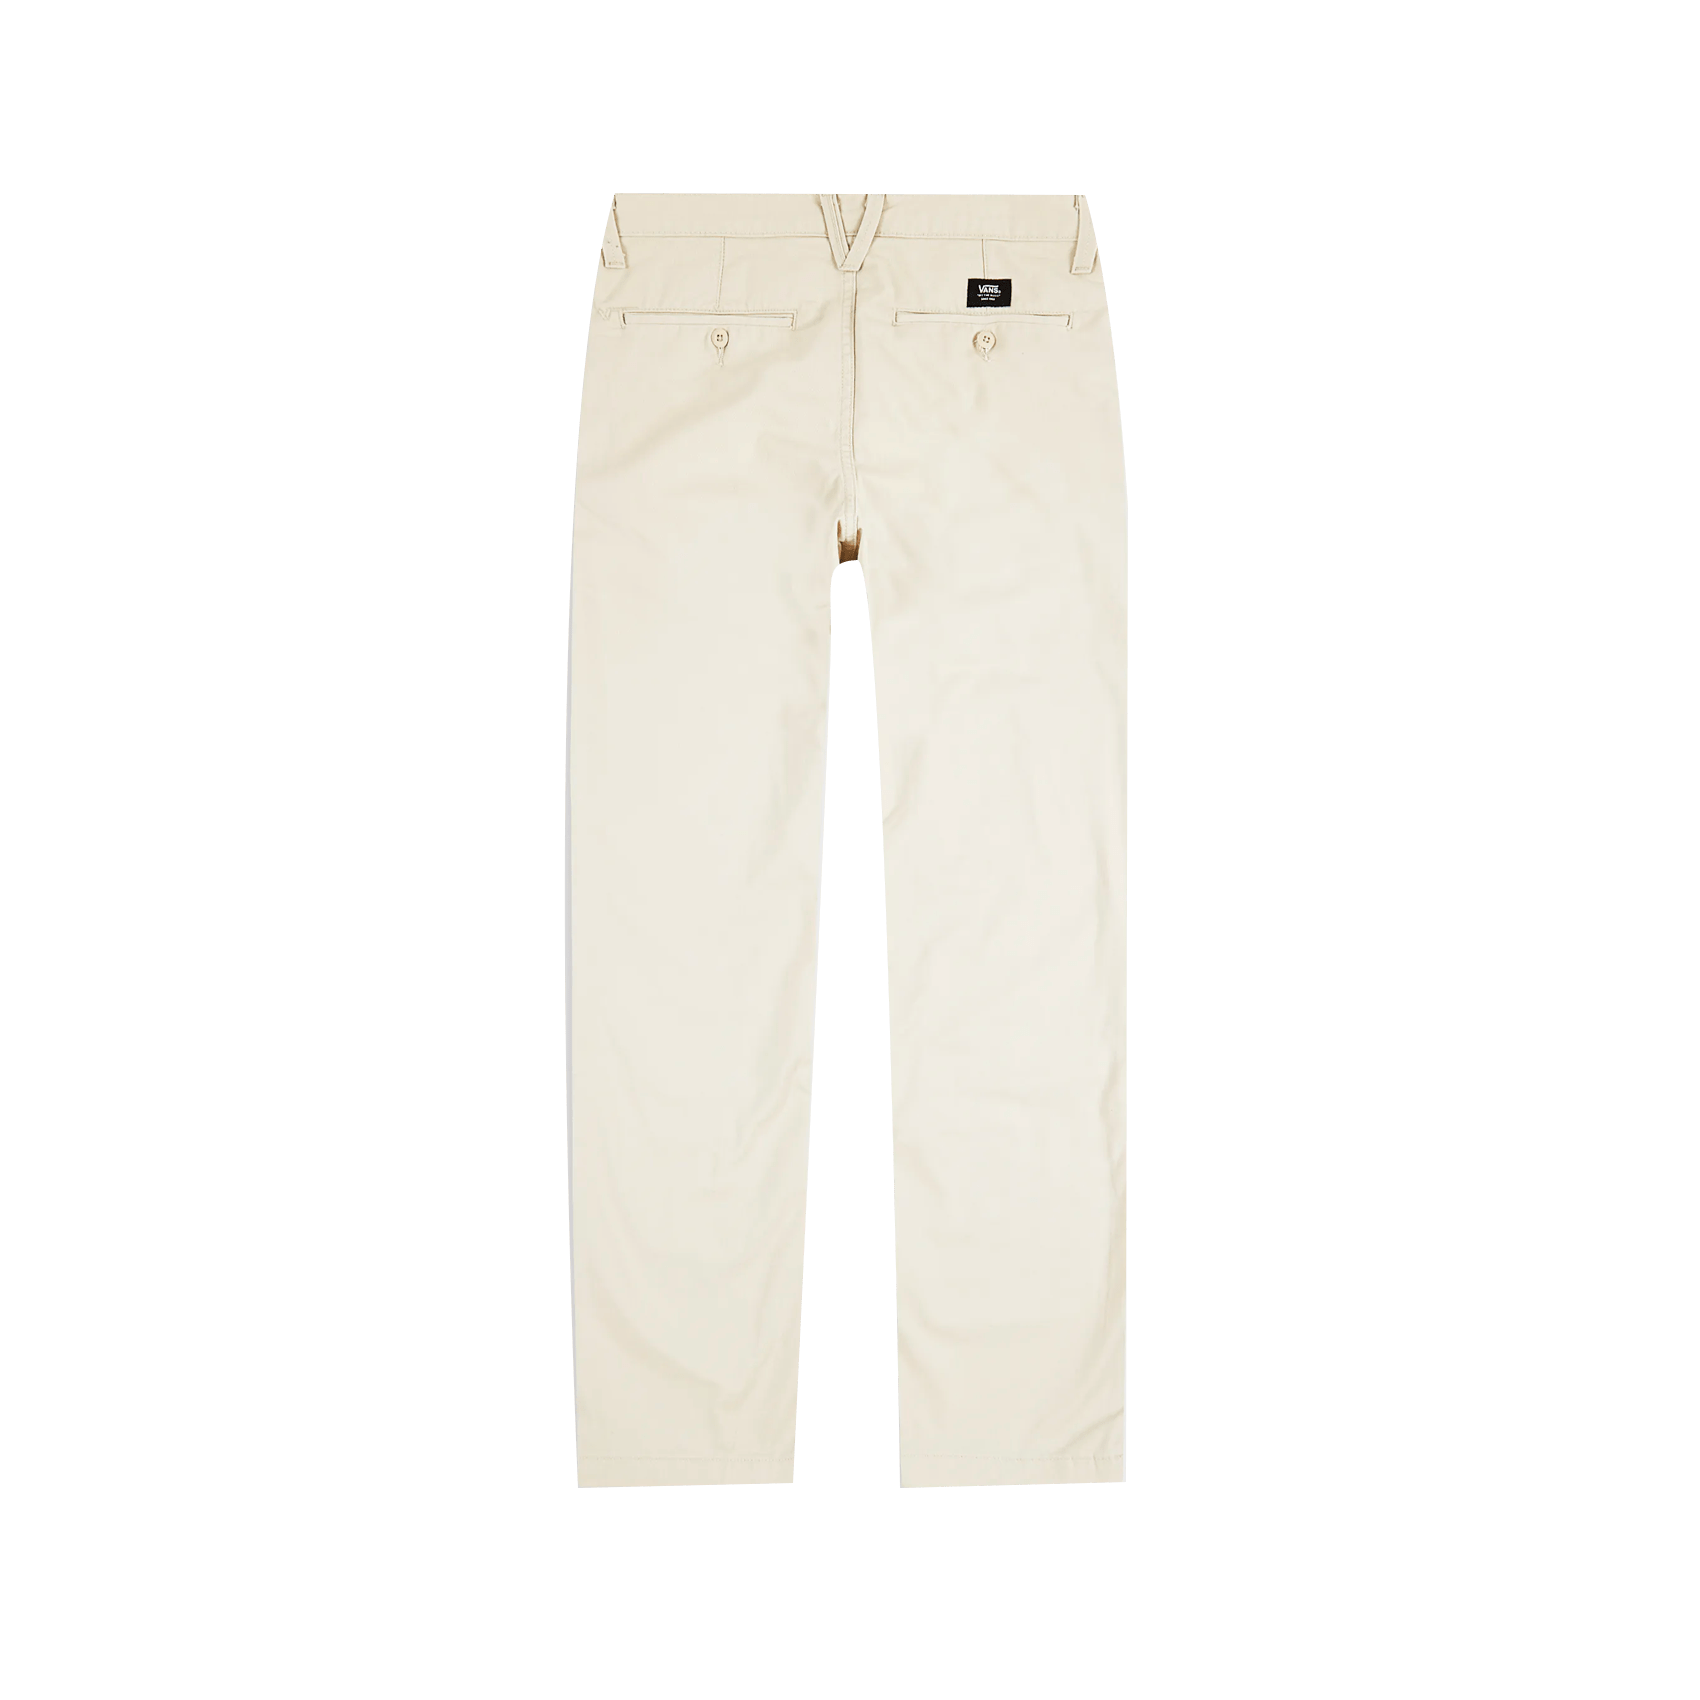 MN Authentic Chino - Oatmeal.